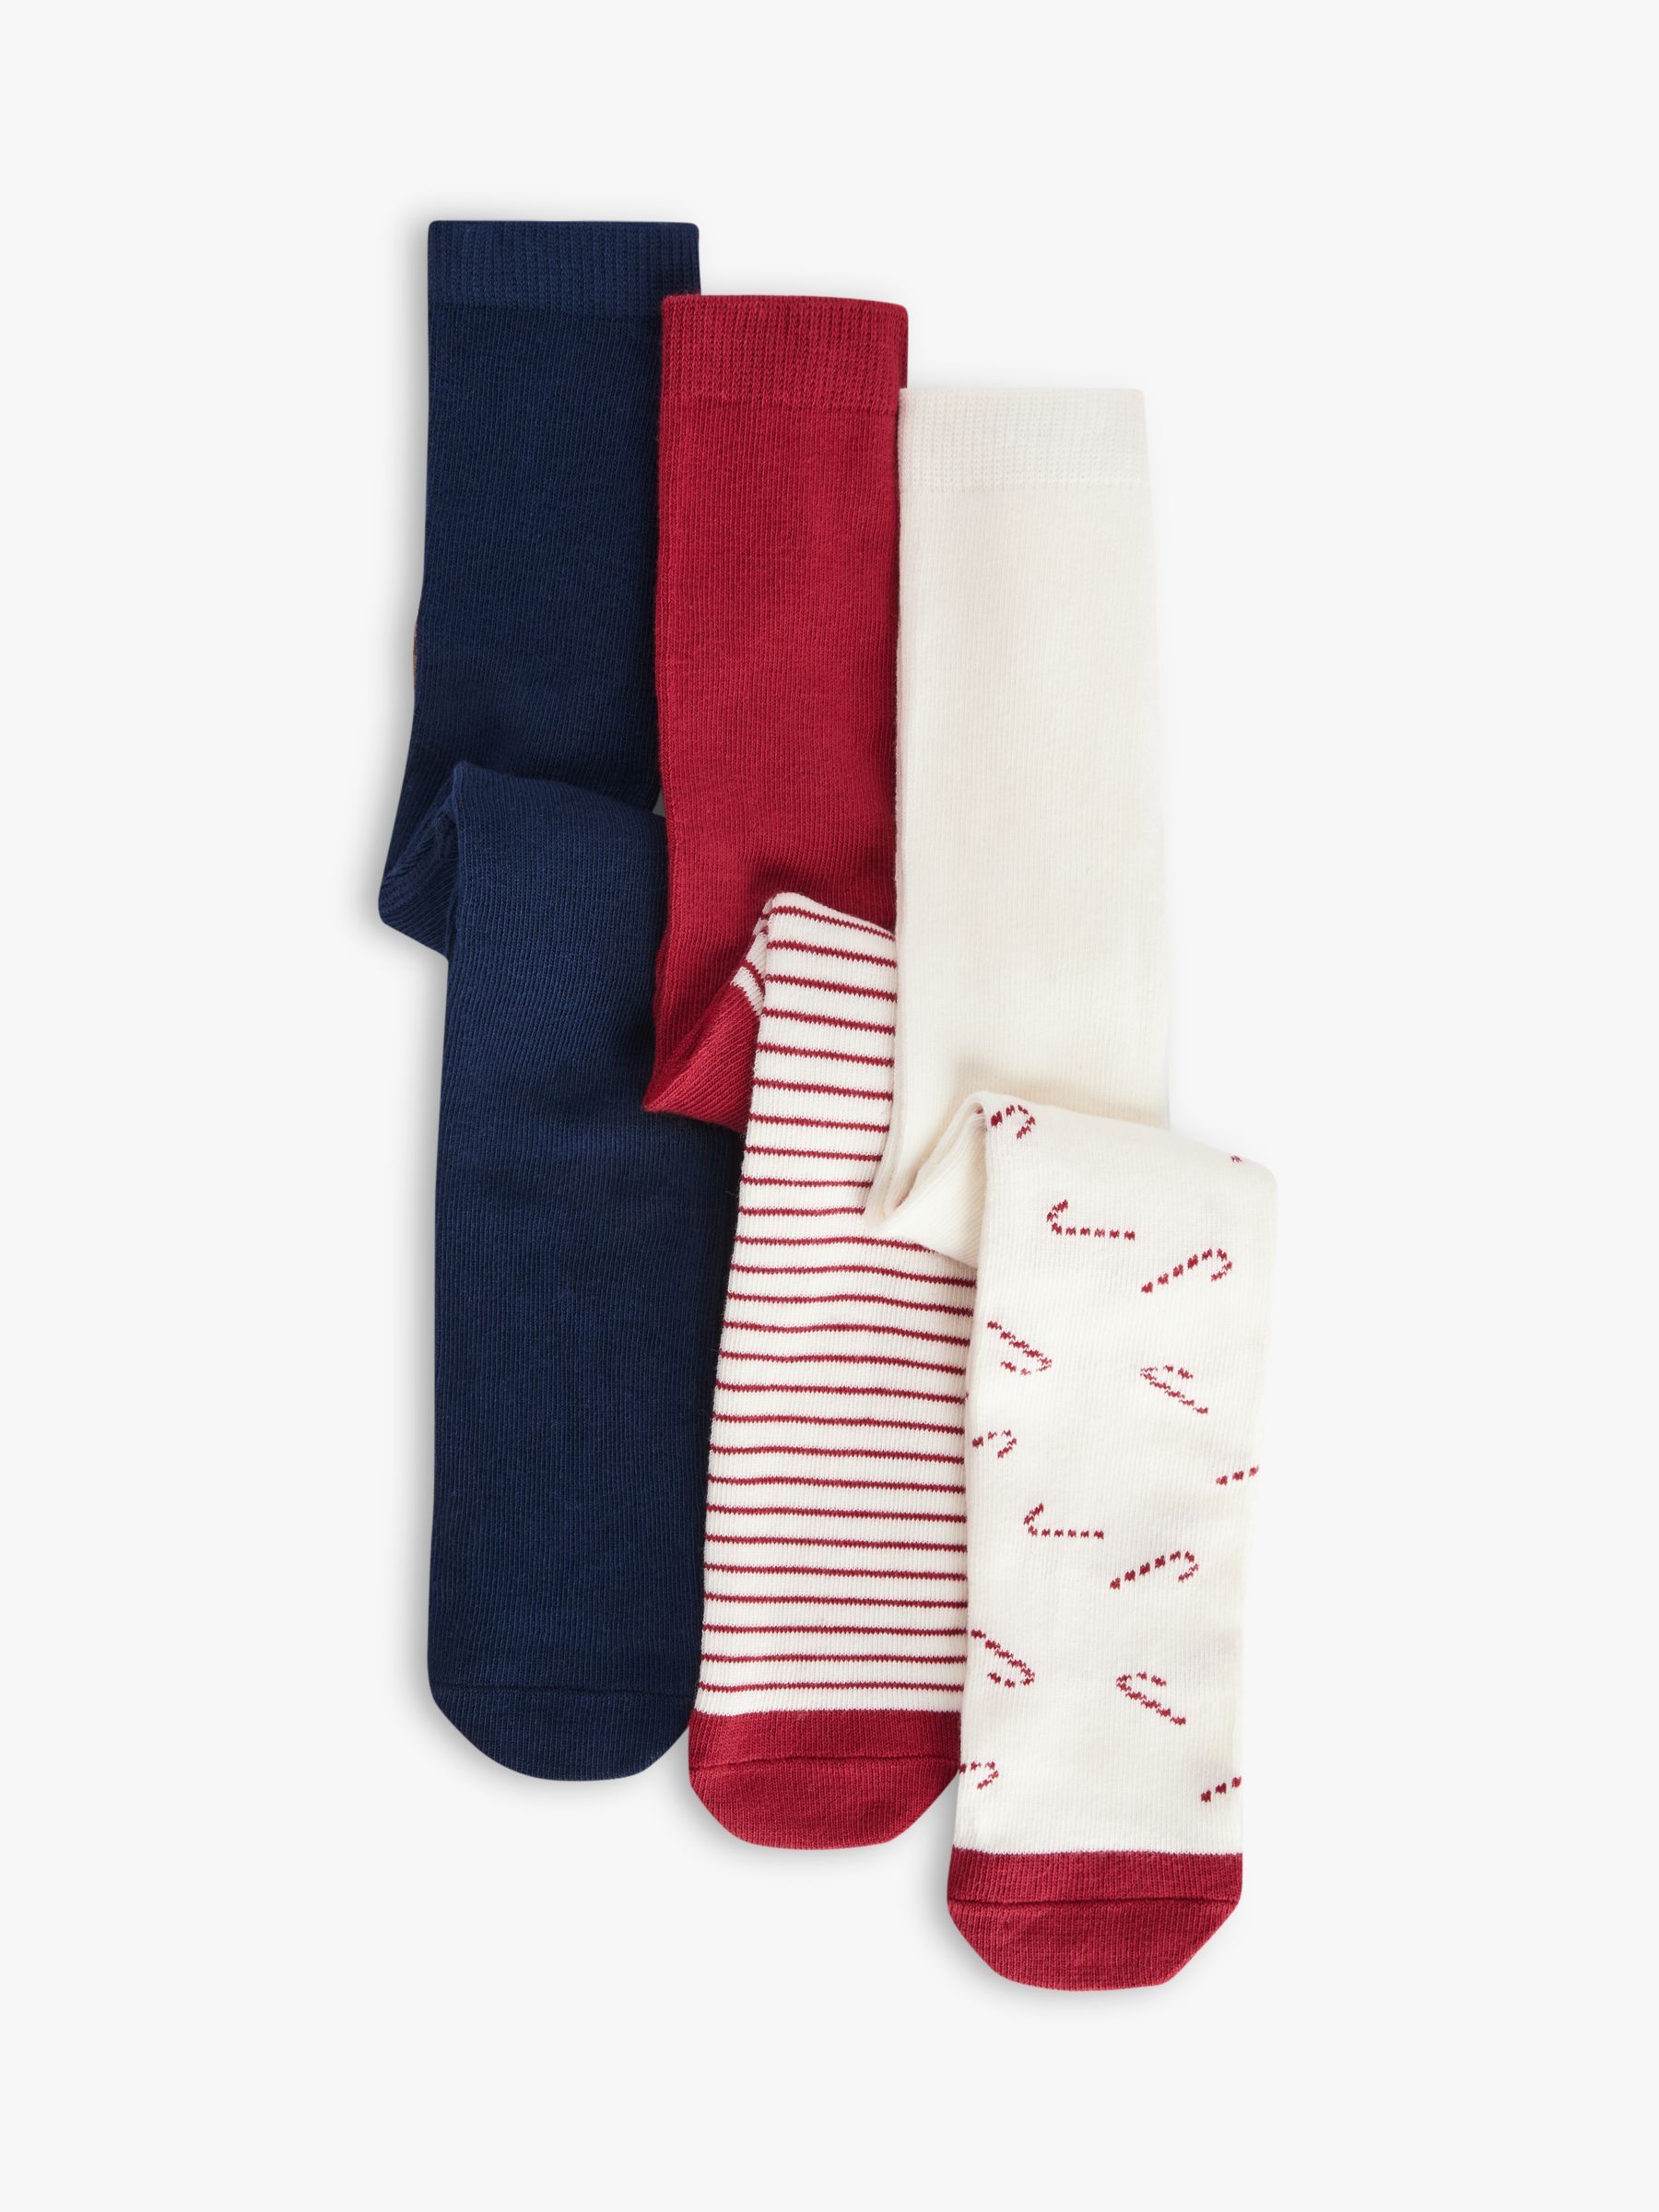 Children's Tights  Organic Cotton Tights for Kids 